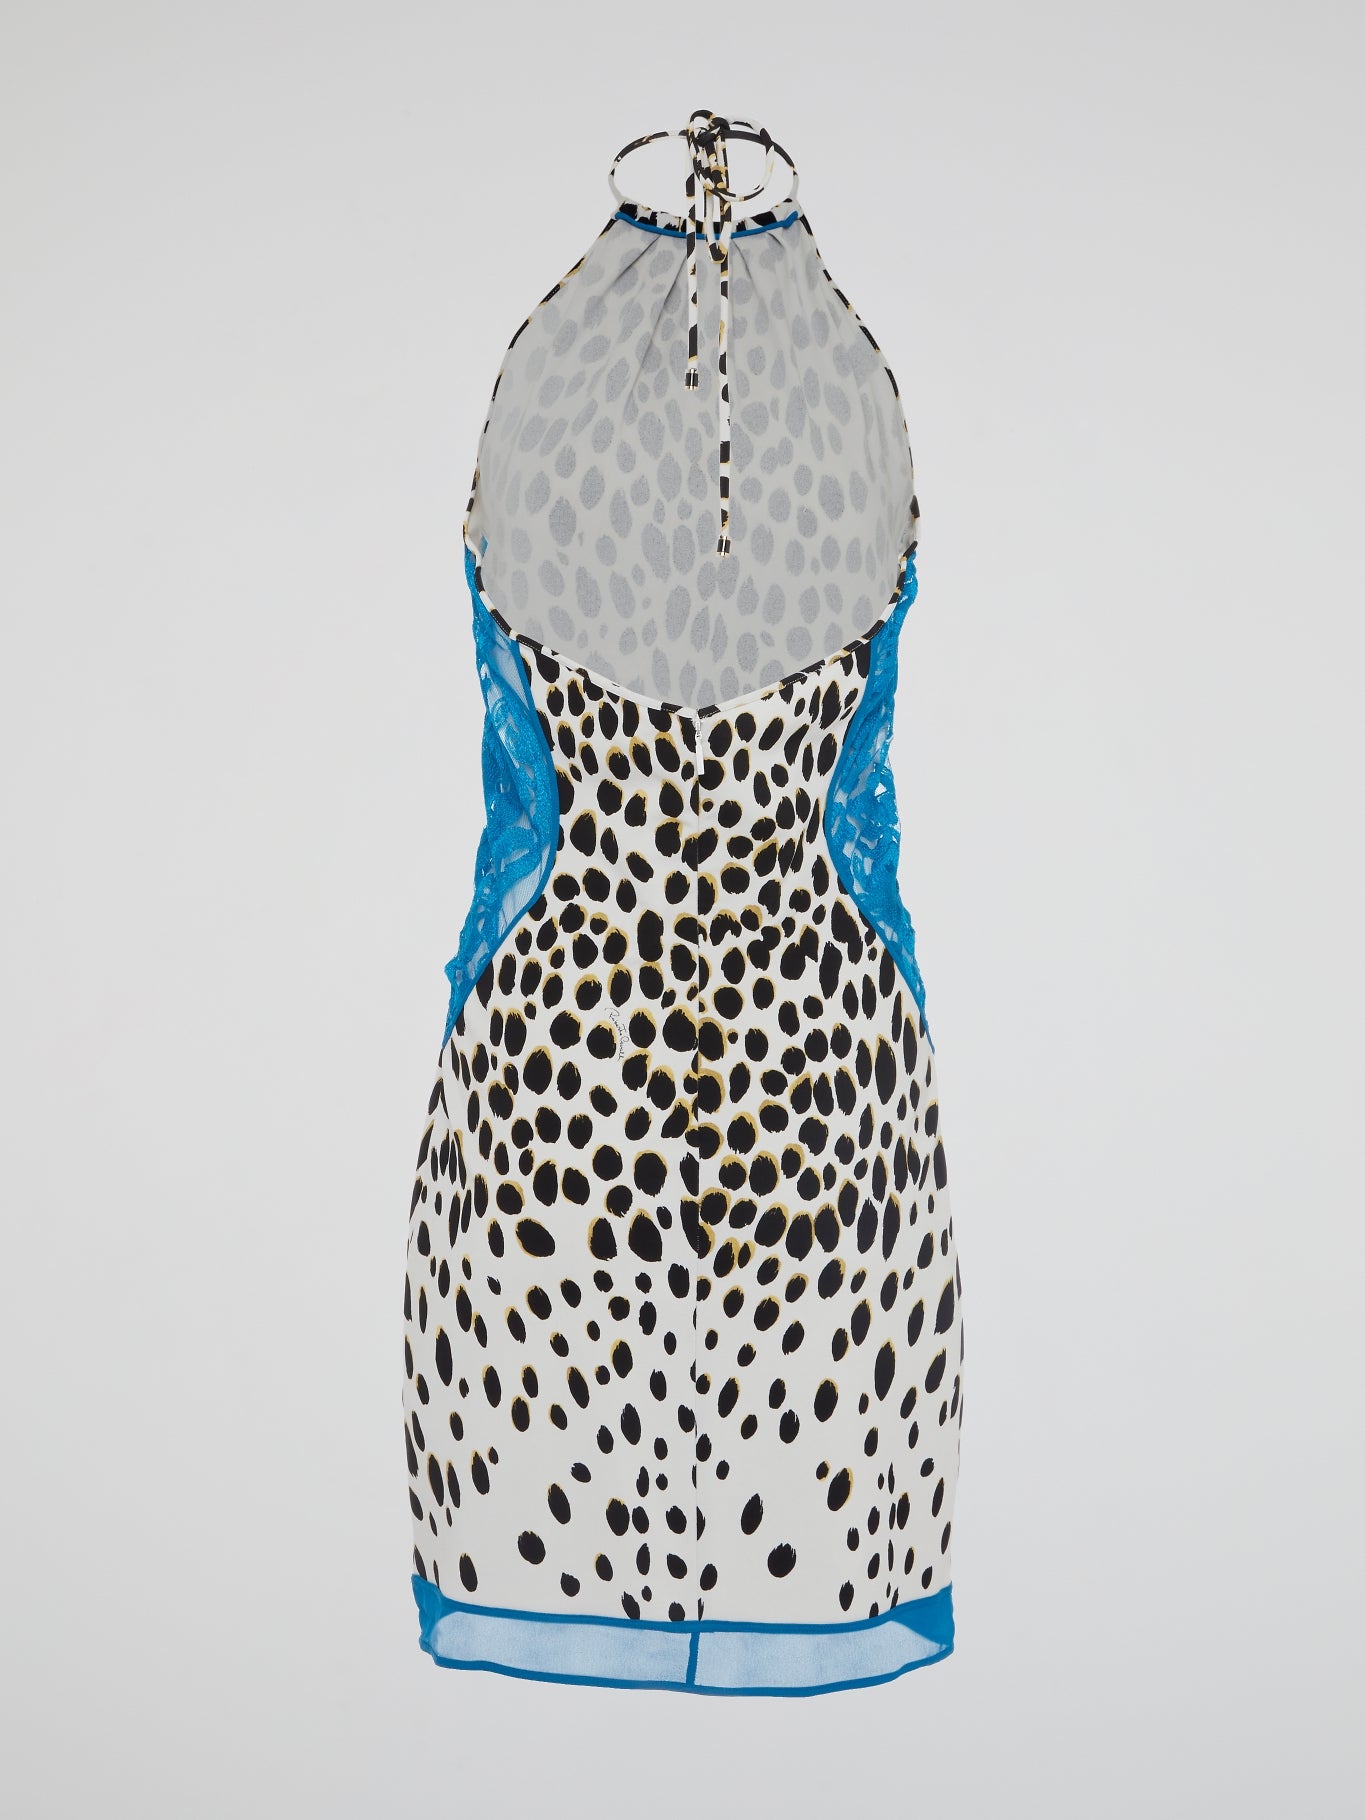 Unleash your inner wild side with our stunning Leopard Print Halter Neck Dress by Roberto Cavalli. This fierce and fabulous piece exudes confidence and sophistication, making it perfect for any special occasion or night out. Stand out from the crowd and turn heads wherever you go in this show-stopping statement dress.